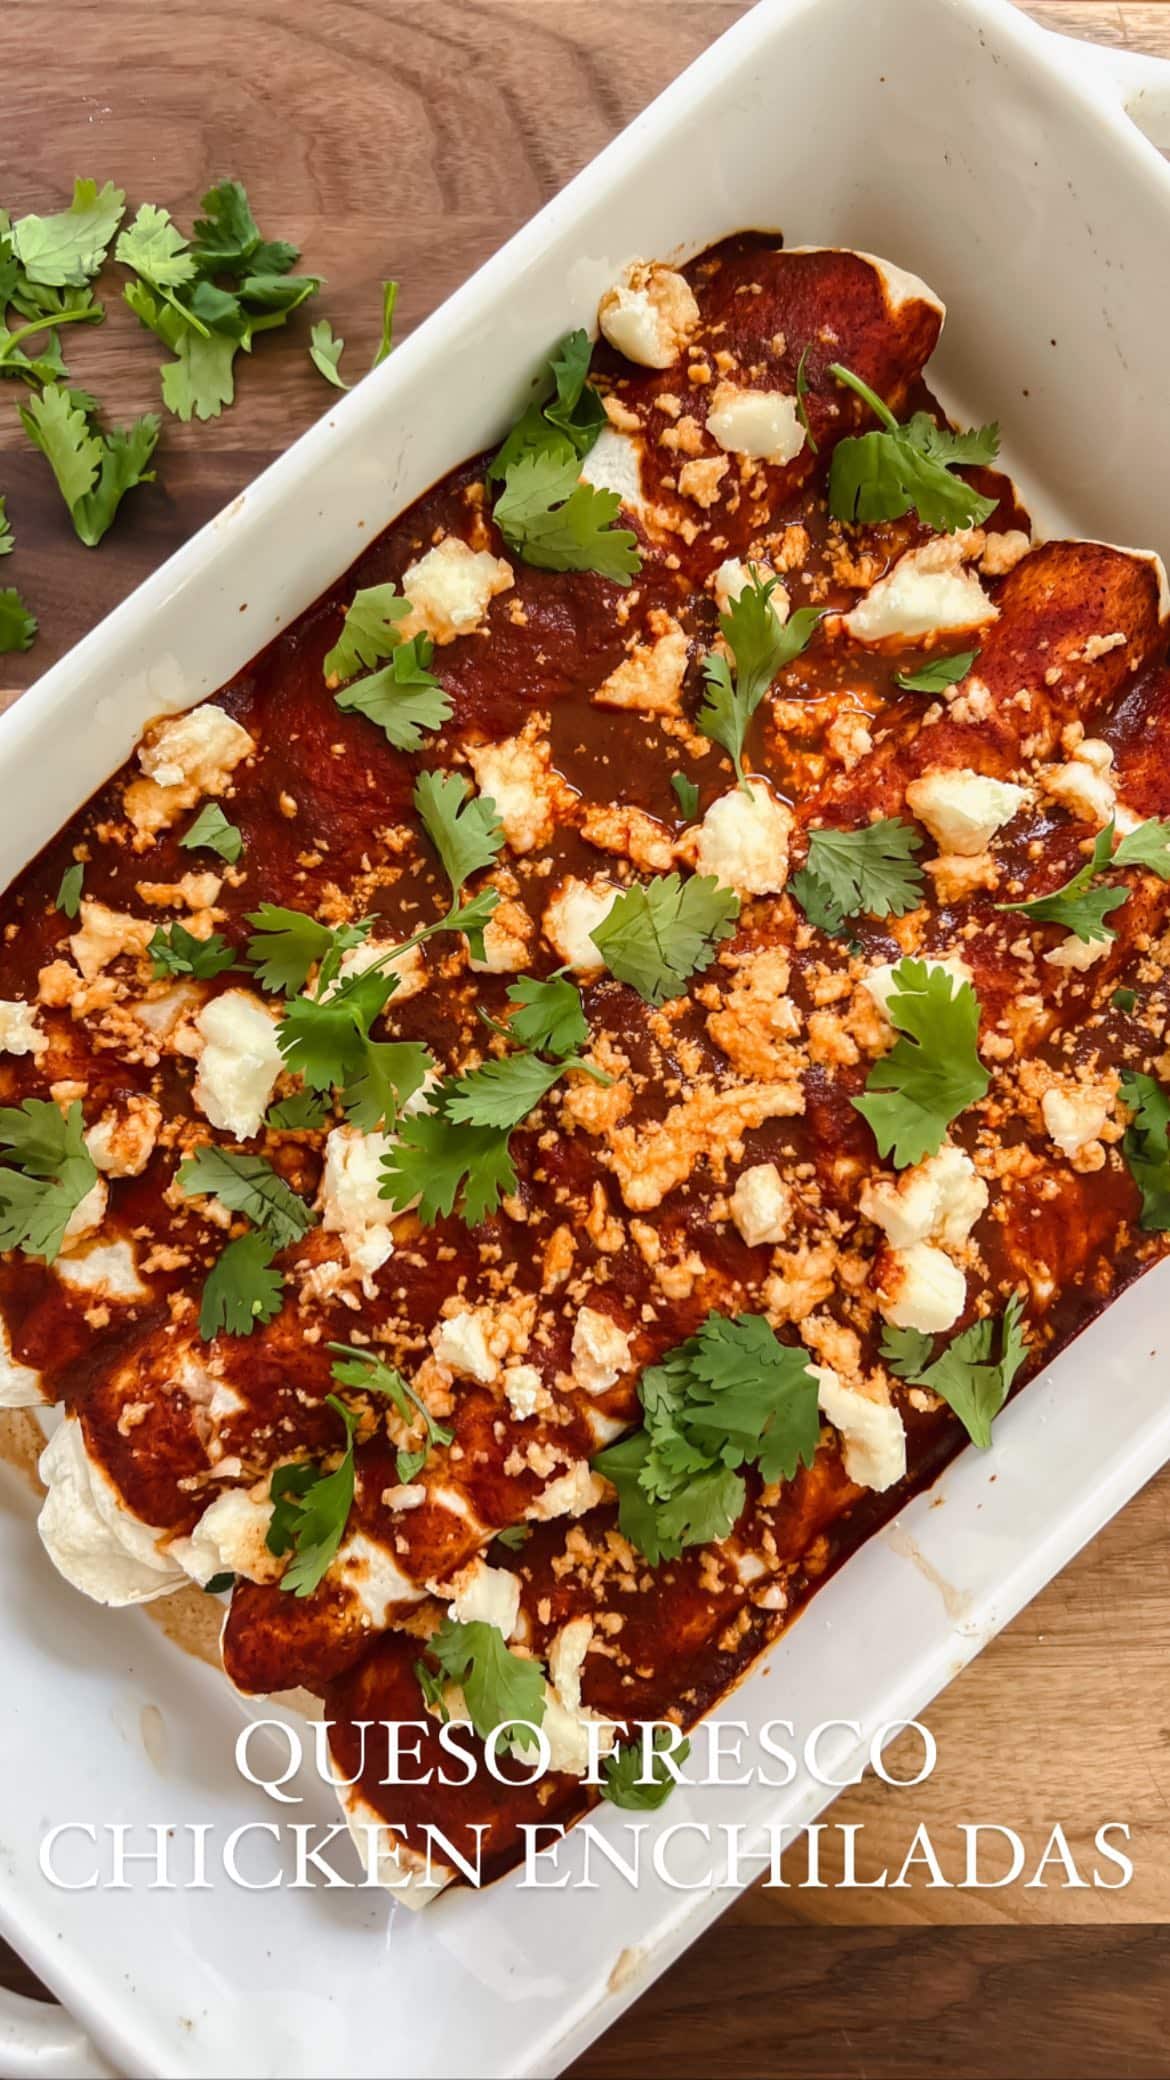 QUESO FRESCO CHICKEN ENCHILADAS🌯 my sister made these for our family vacation & they were so good we had to come home & make them! follow @daddioskitchen for more family friendly meals💯

the best part is you cook the chicken in the crockpot & then just assemble them & bake when it’s time to eat!😎

ingredients:
-burrito-sized tortillas
-chicken breasts
-enchilada sauce
-chicken broth 
-greek yogurt
-taco seasoning 
-queso fresco 
-cilantro

the full recipe is on our blog & linked in our profile👌🏻

https://daddioskitchen.com/2022/09/06/queso-fresco-chicken-enchiladas/